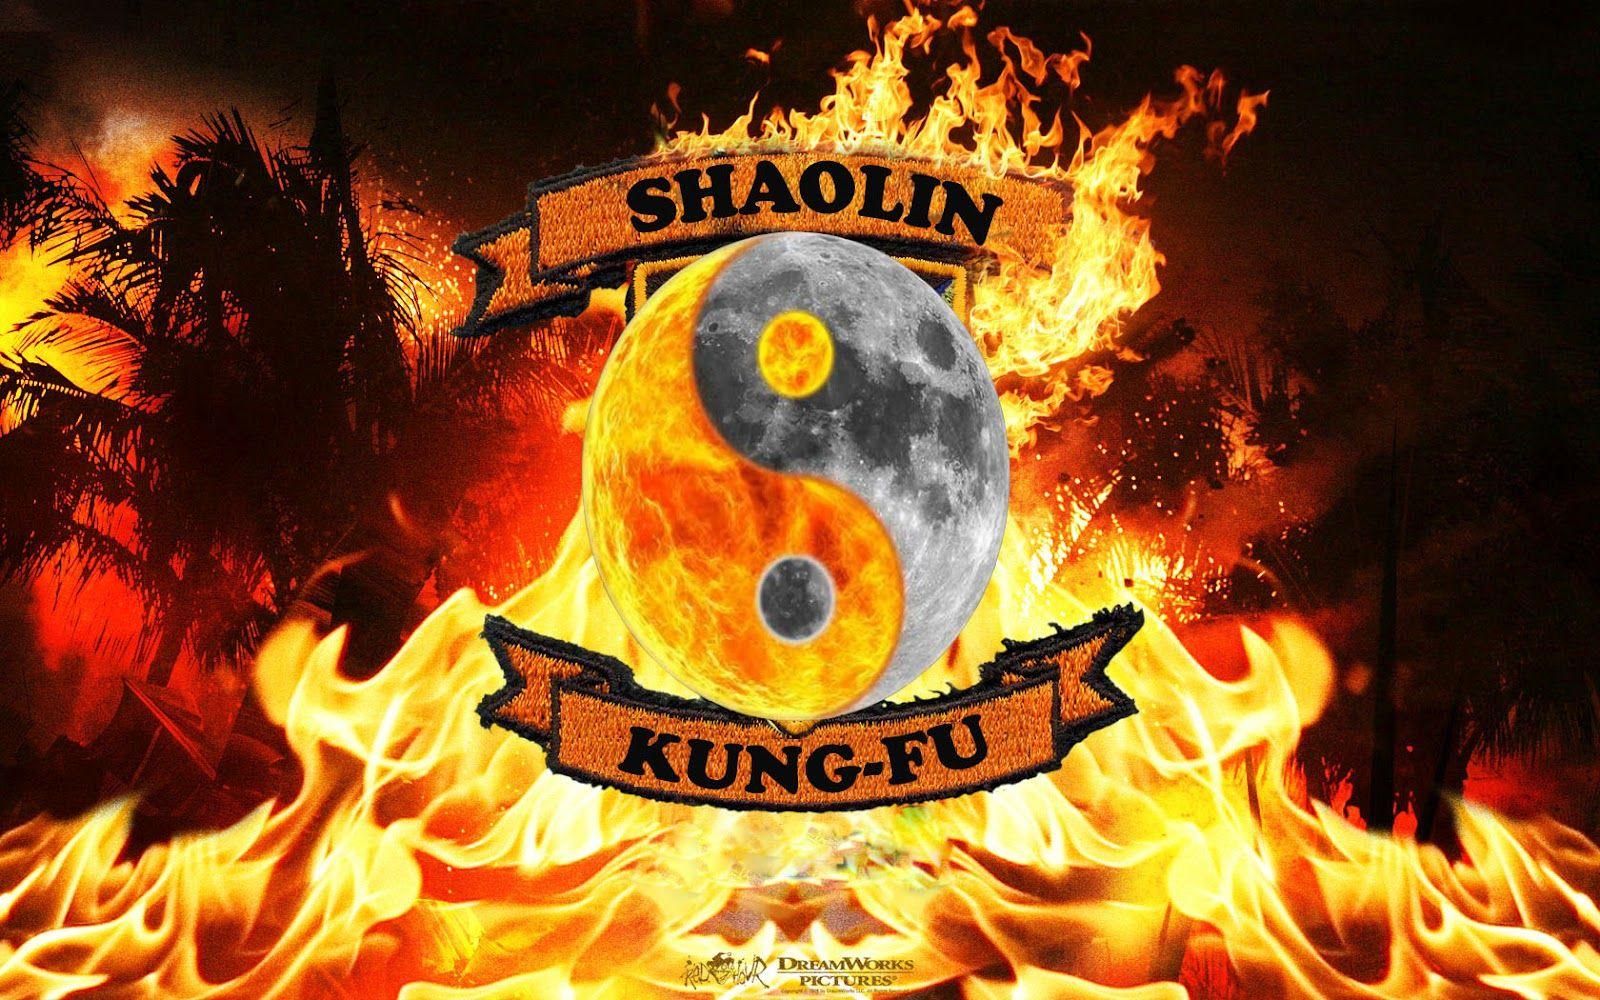 Kung Fu Symbol For Fire